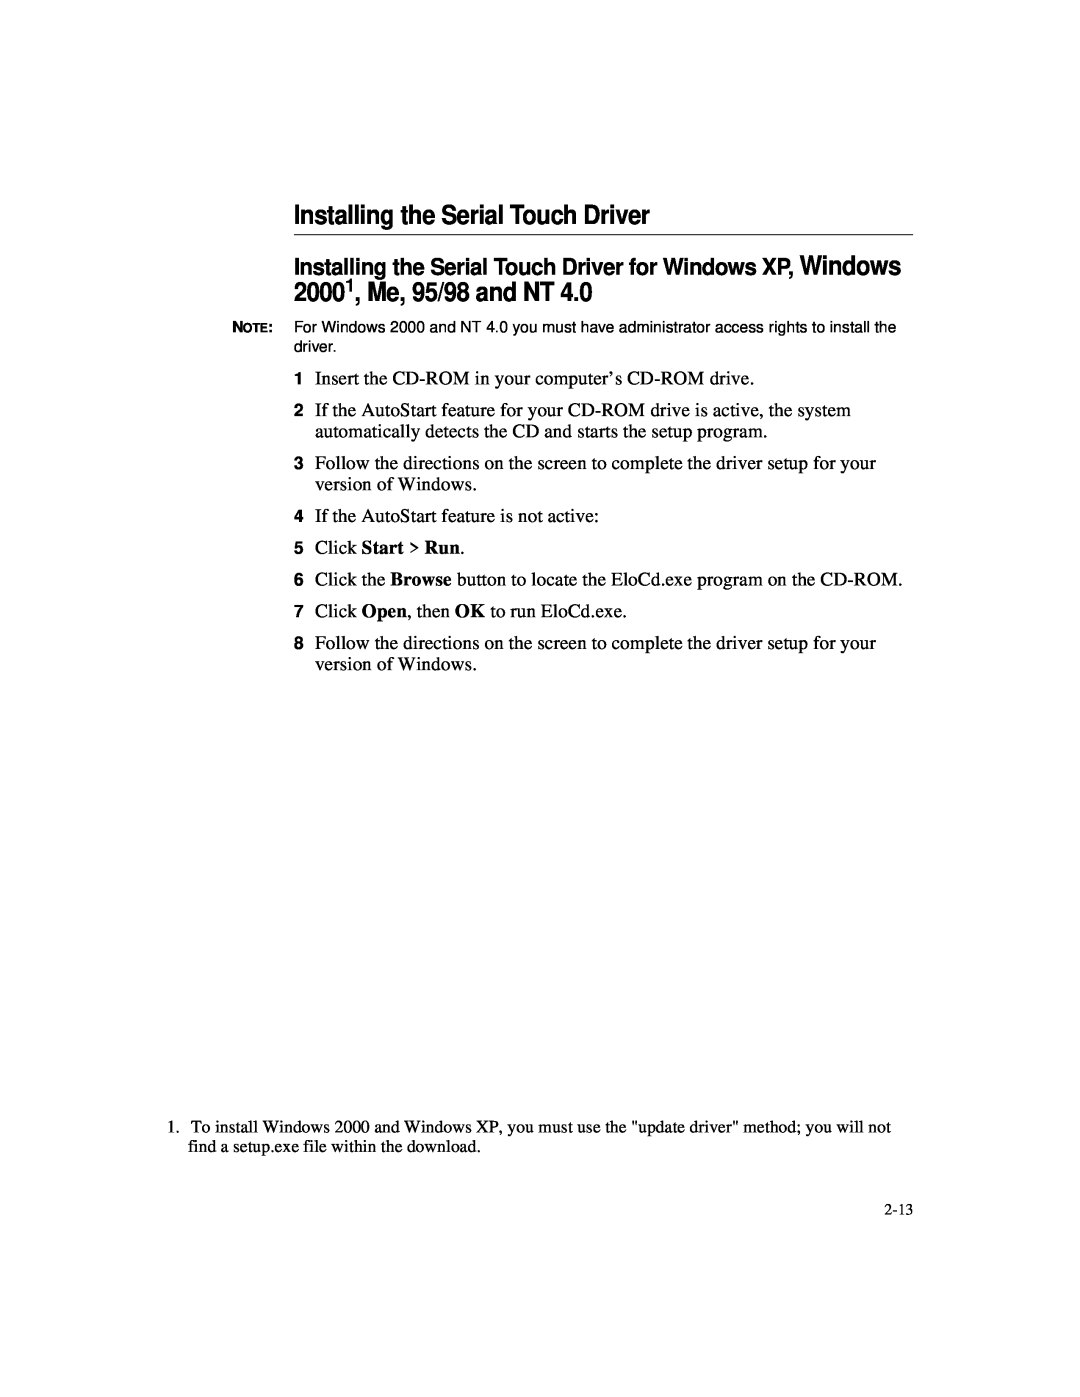 Elo TouchSystems 1524L manual Installing the Serial Touch Driver, 20001, Me, 95/98 and NT 